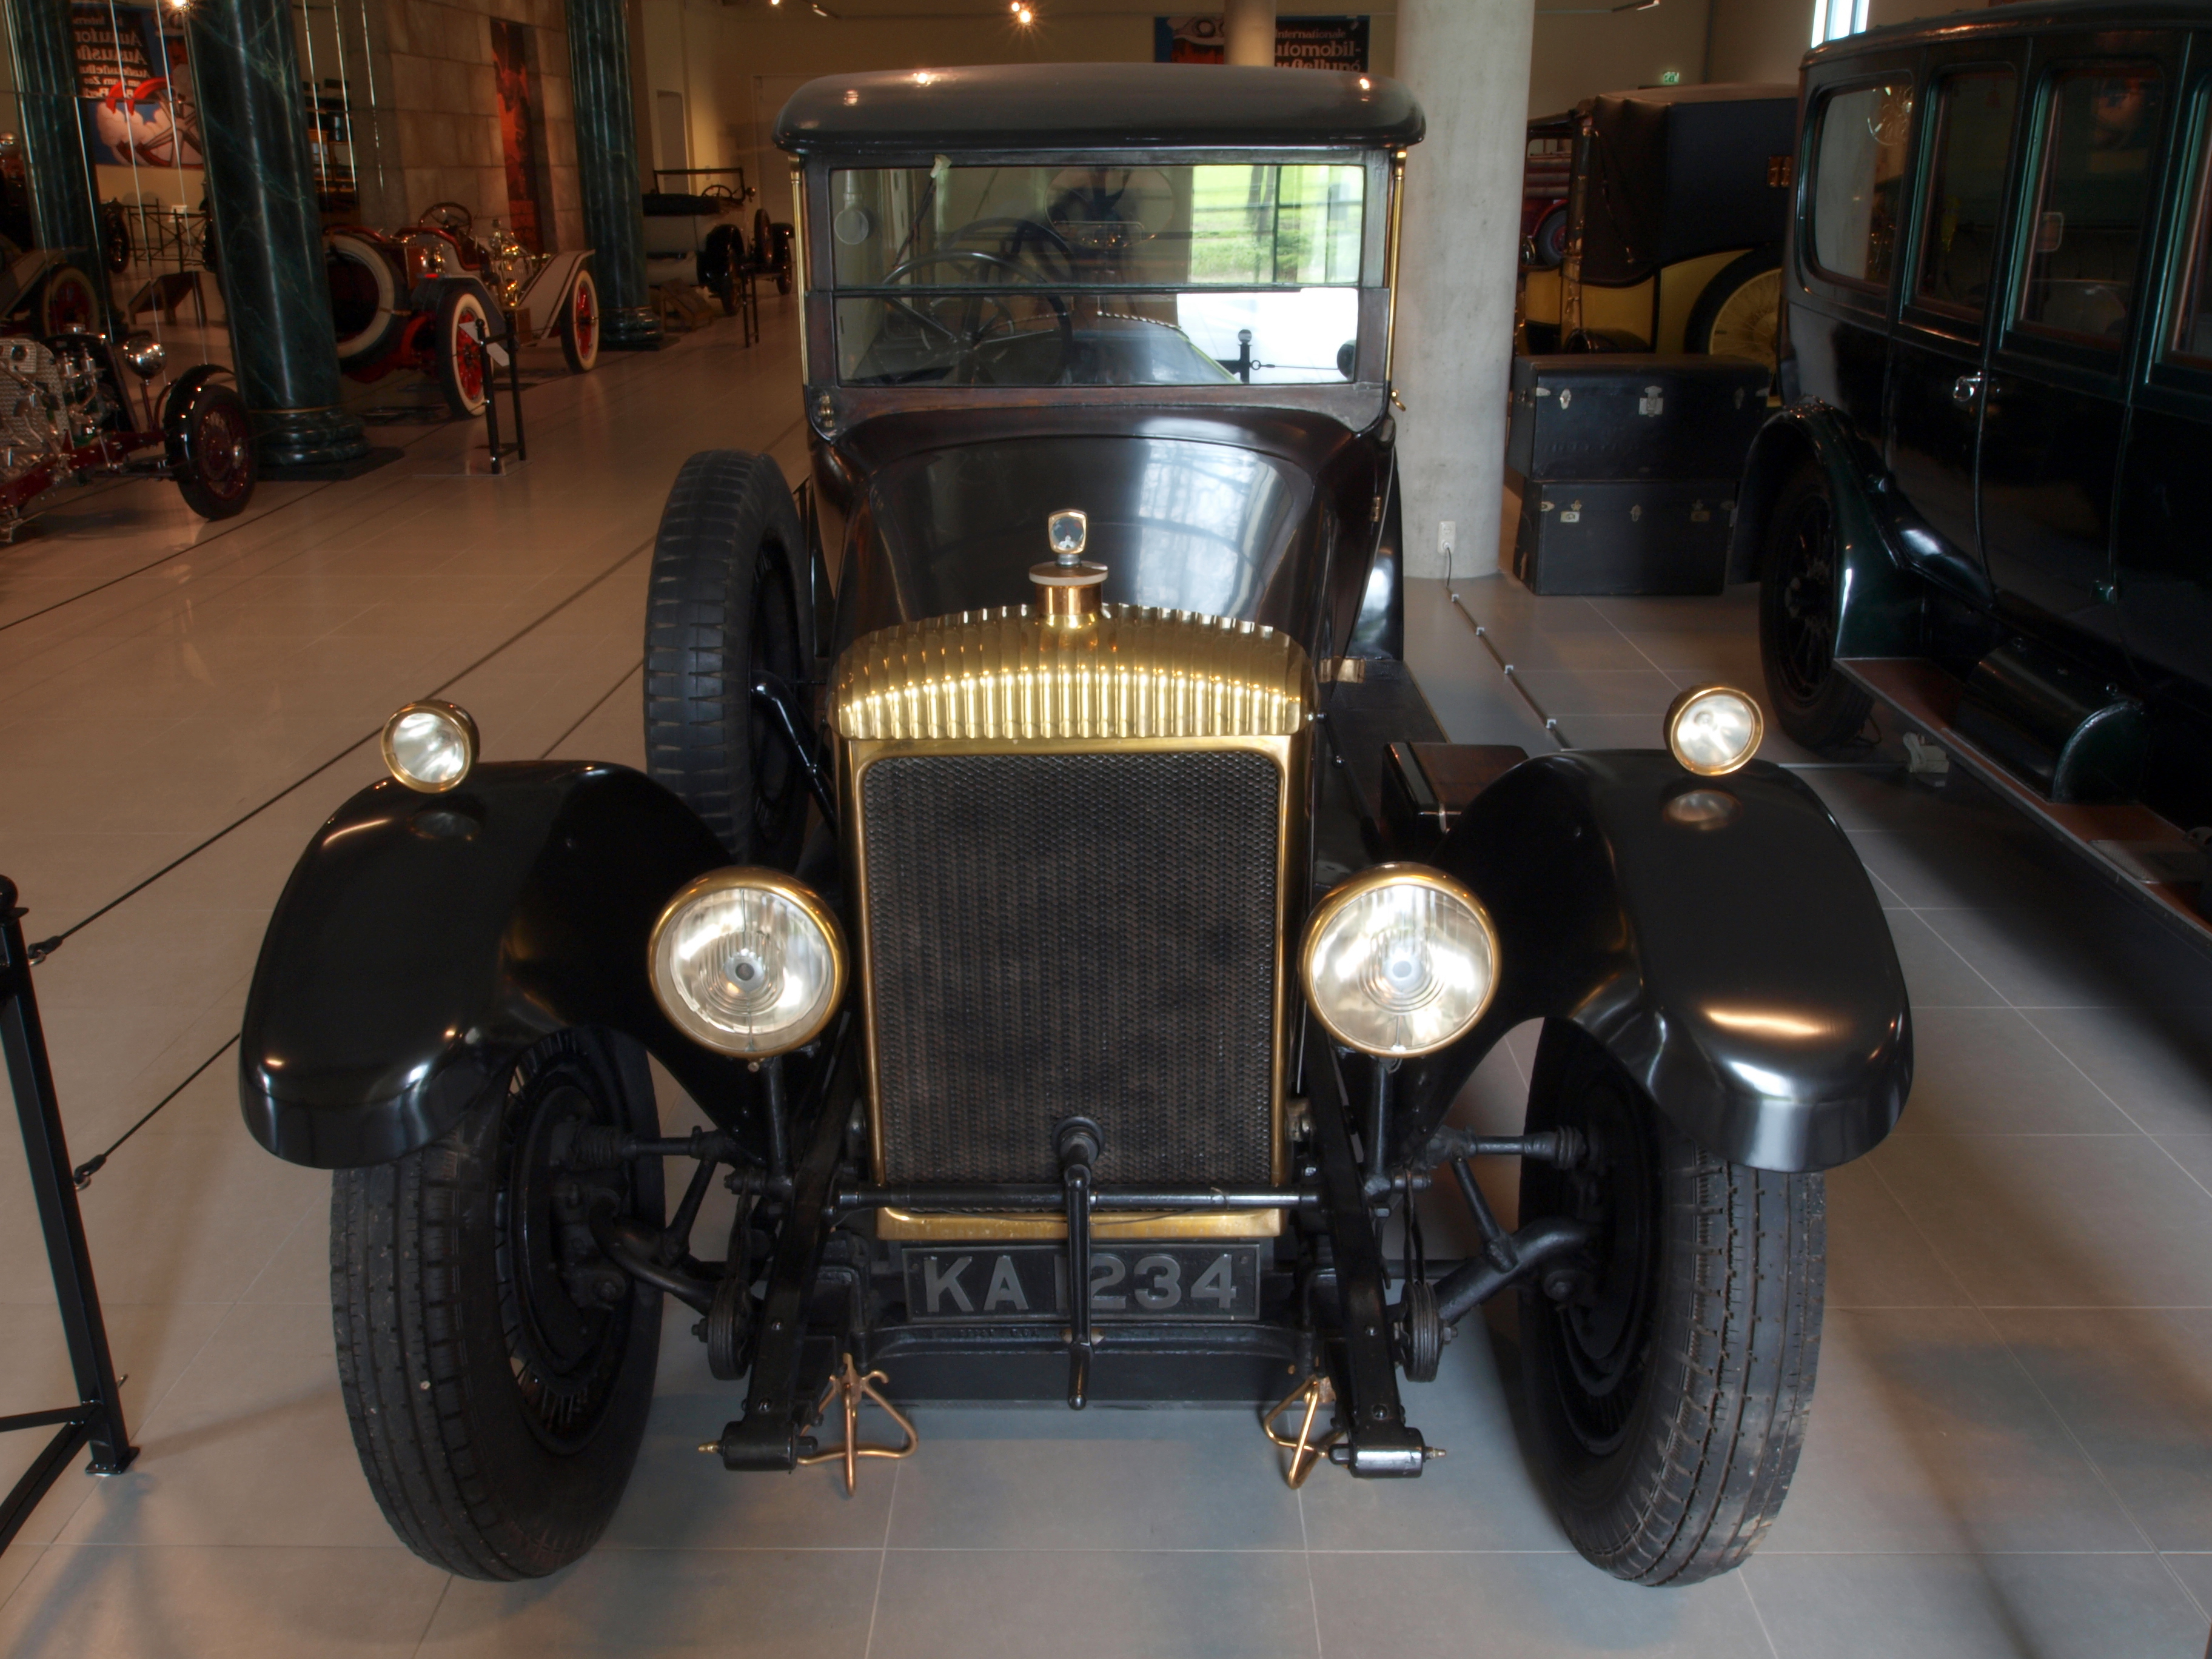 Daimler 45 hp Photo Gallery: Photo #04 out of 12, Image Size - 720 ...